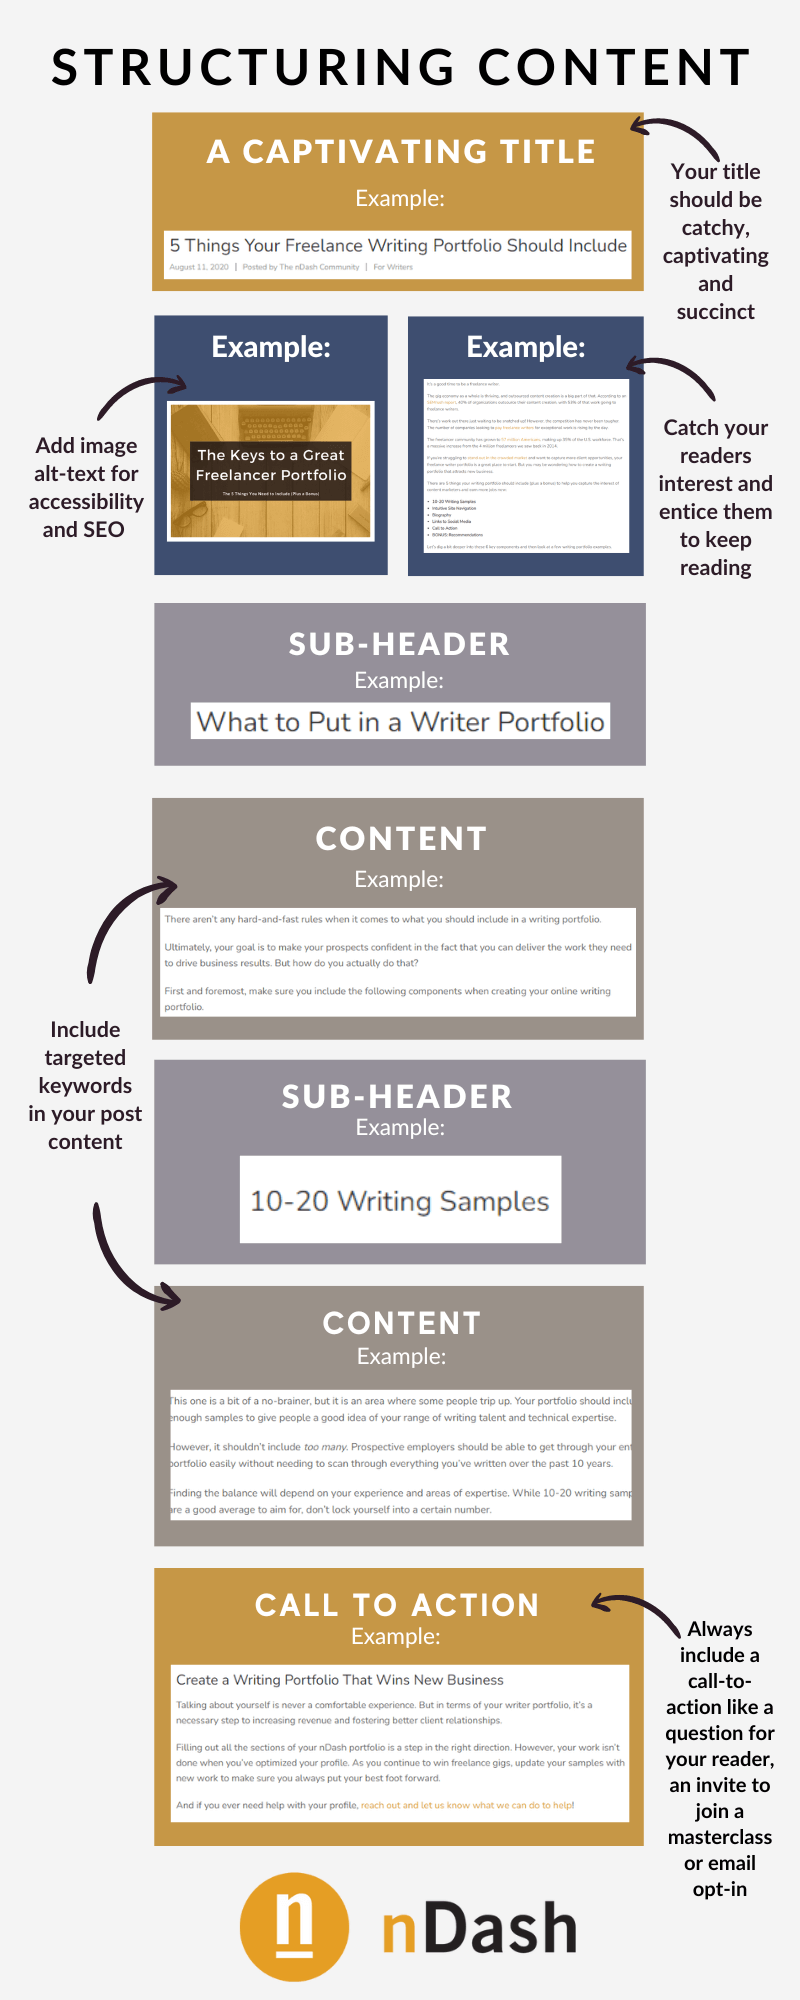 How to structure helpful content.